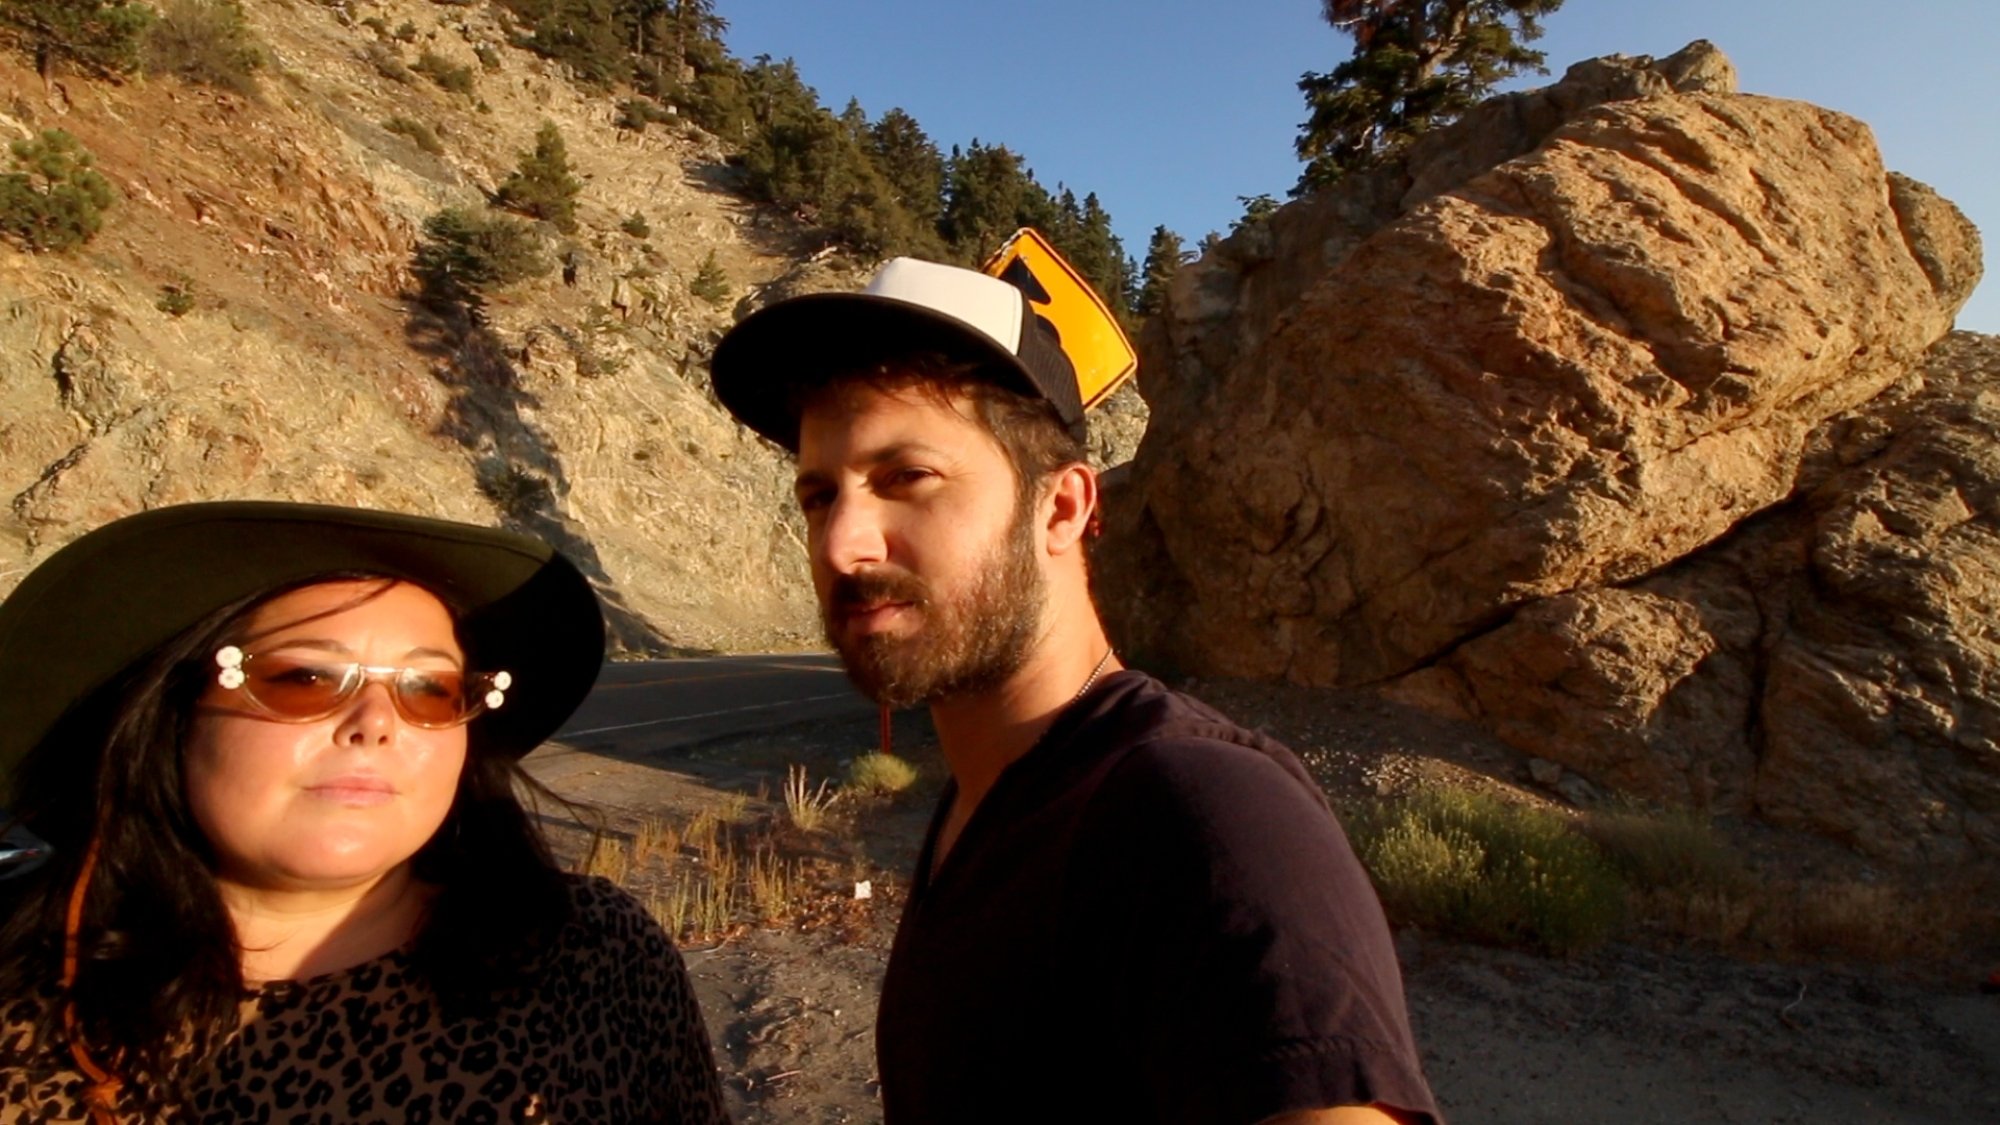 'The Outwaters' Angela Basolis as Ange Bocuzzi and Robbie Banfitch as Robbie Zagorac looking at the camera standing in front of a dirt road and a rocky mountainside